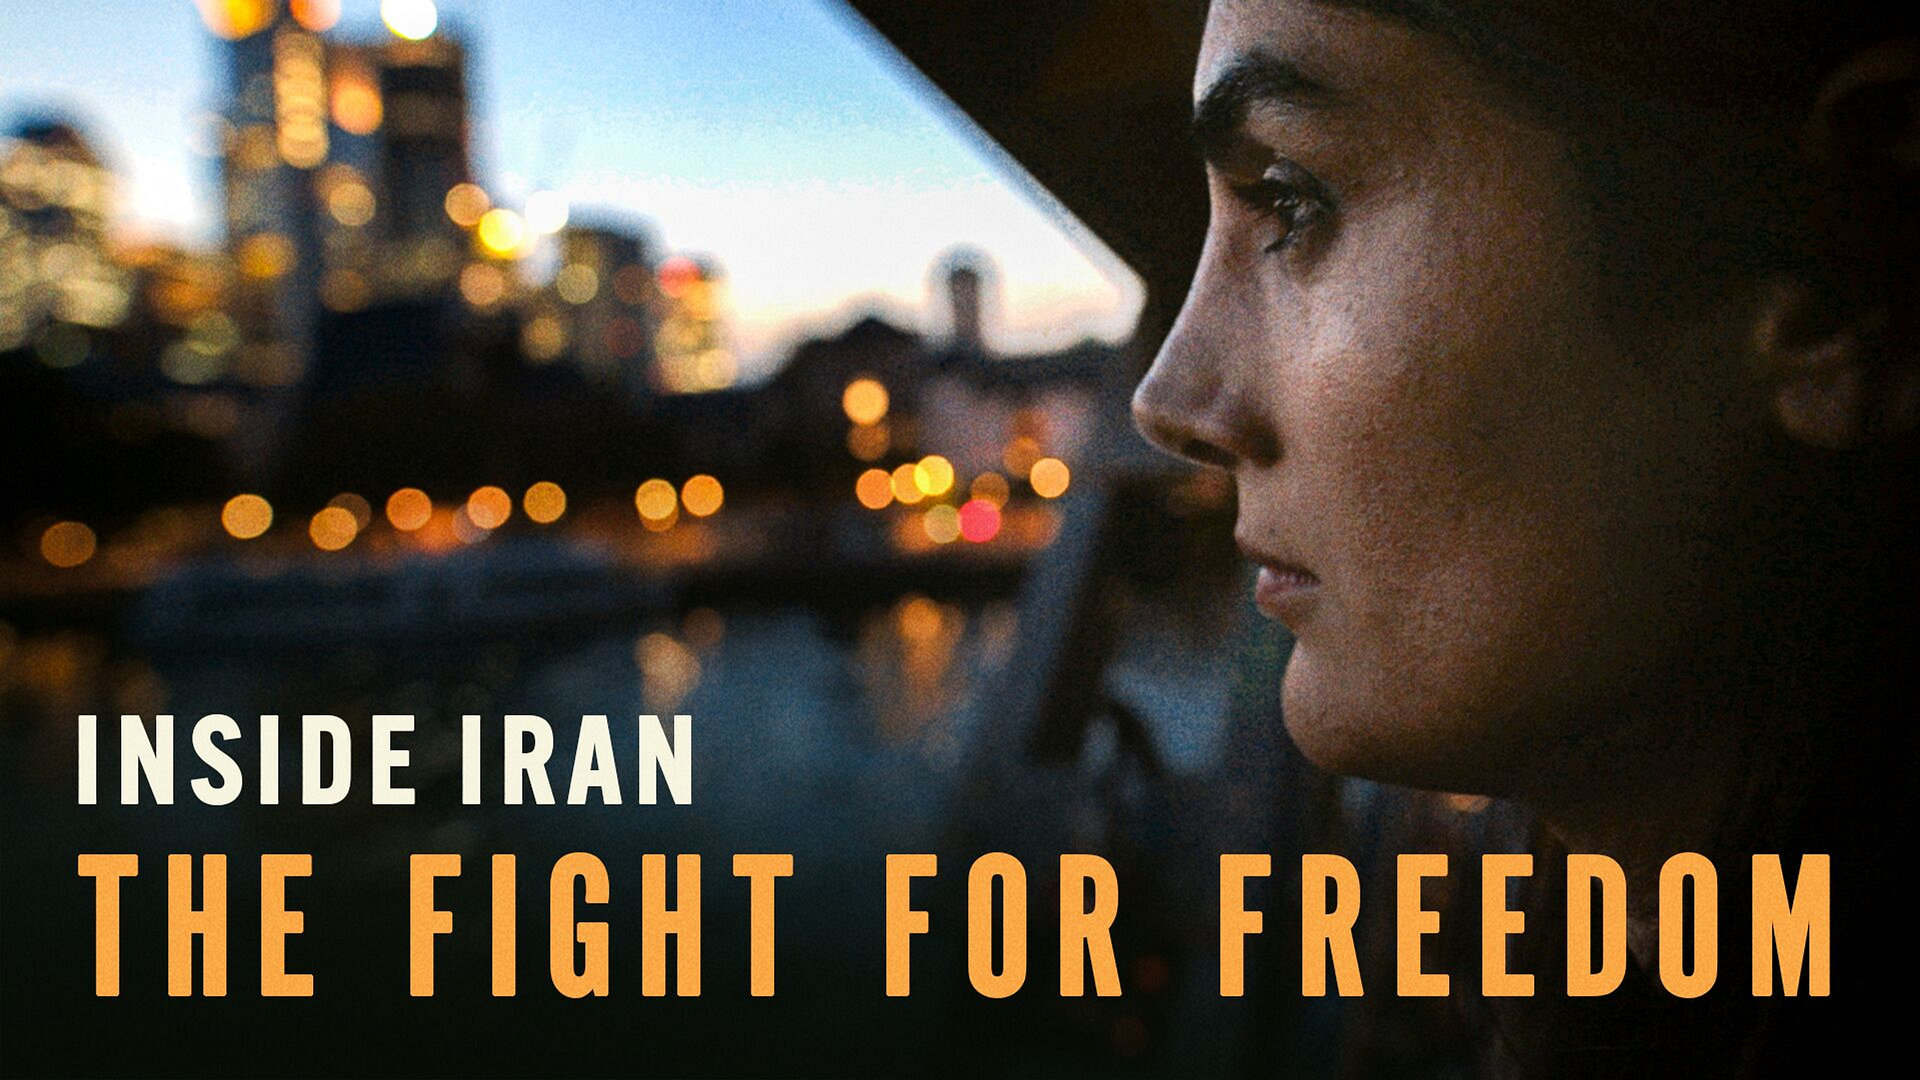 Inside Iran: The Fight for Freedom